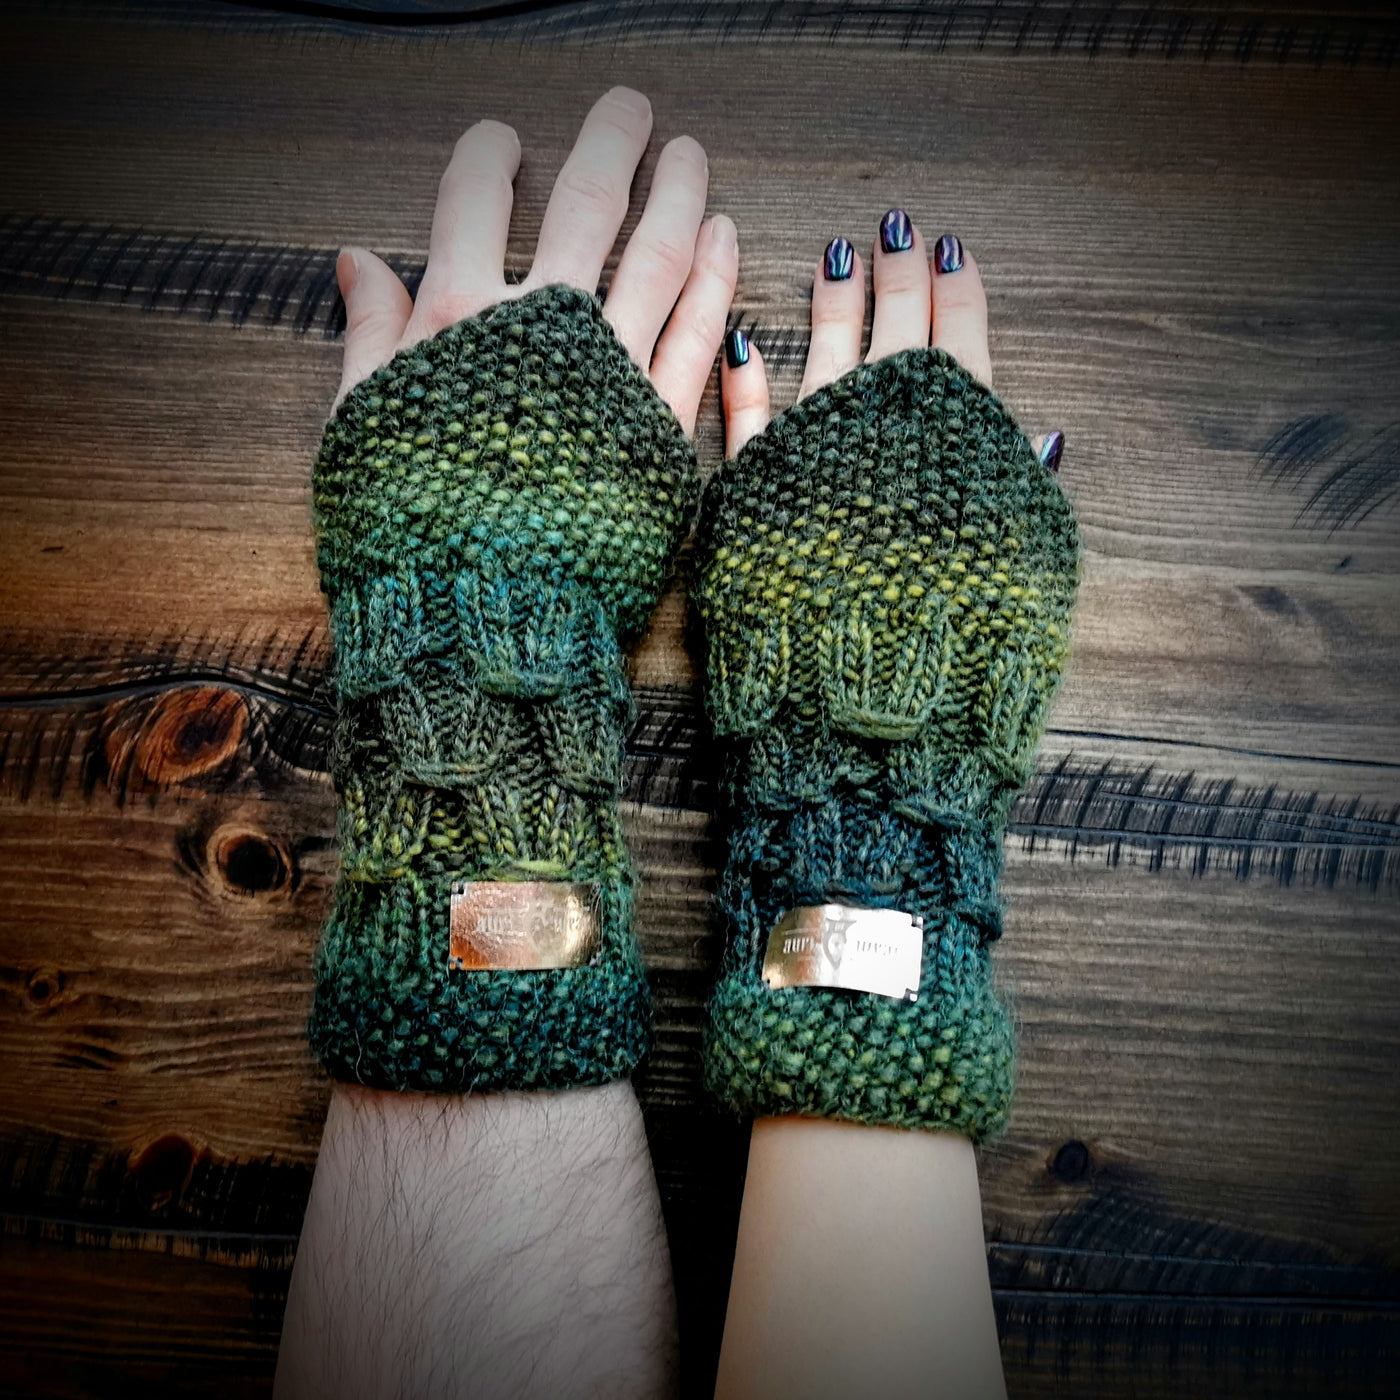 Handmade knitted lively green wrist warmers